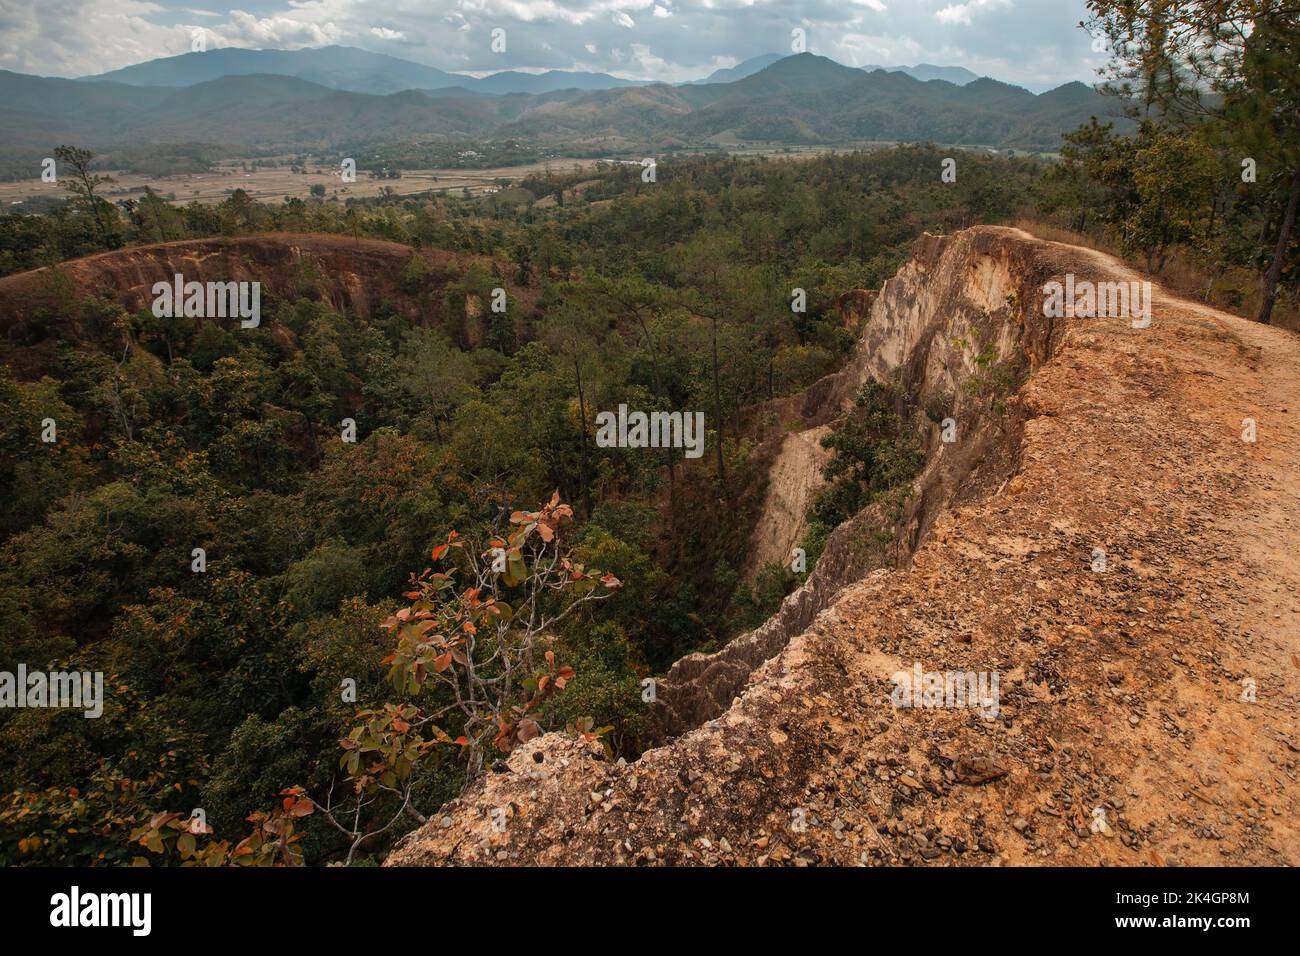 Mountain landscape in northern Thailand. Stock Photo